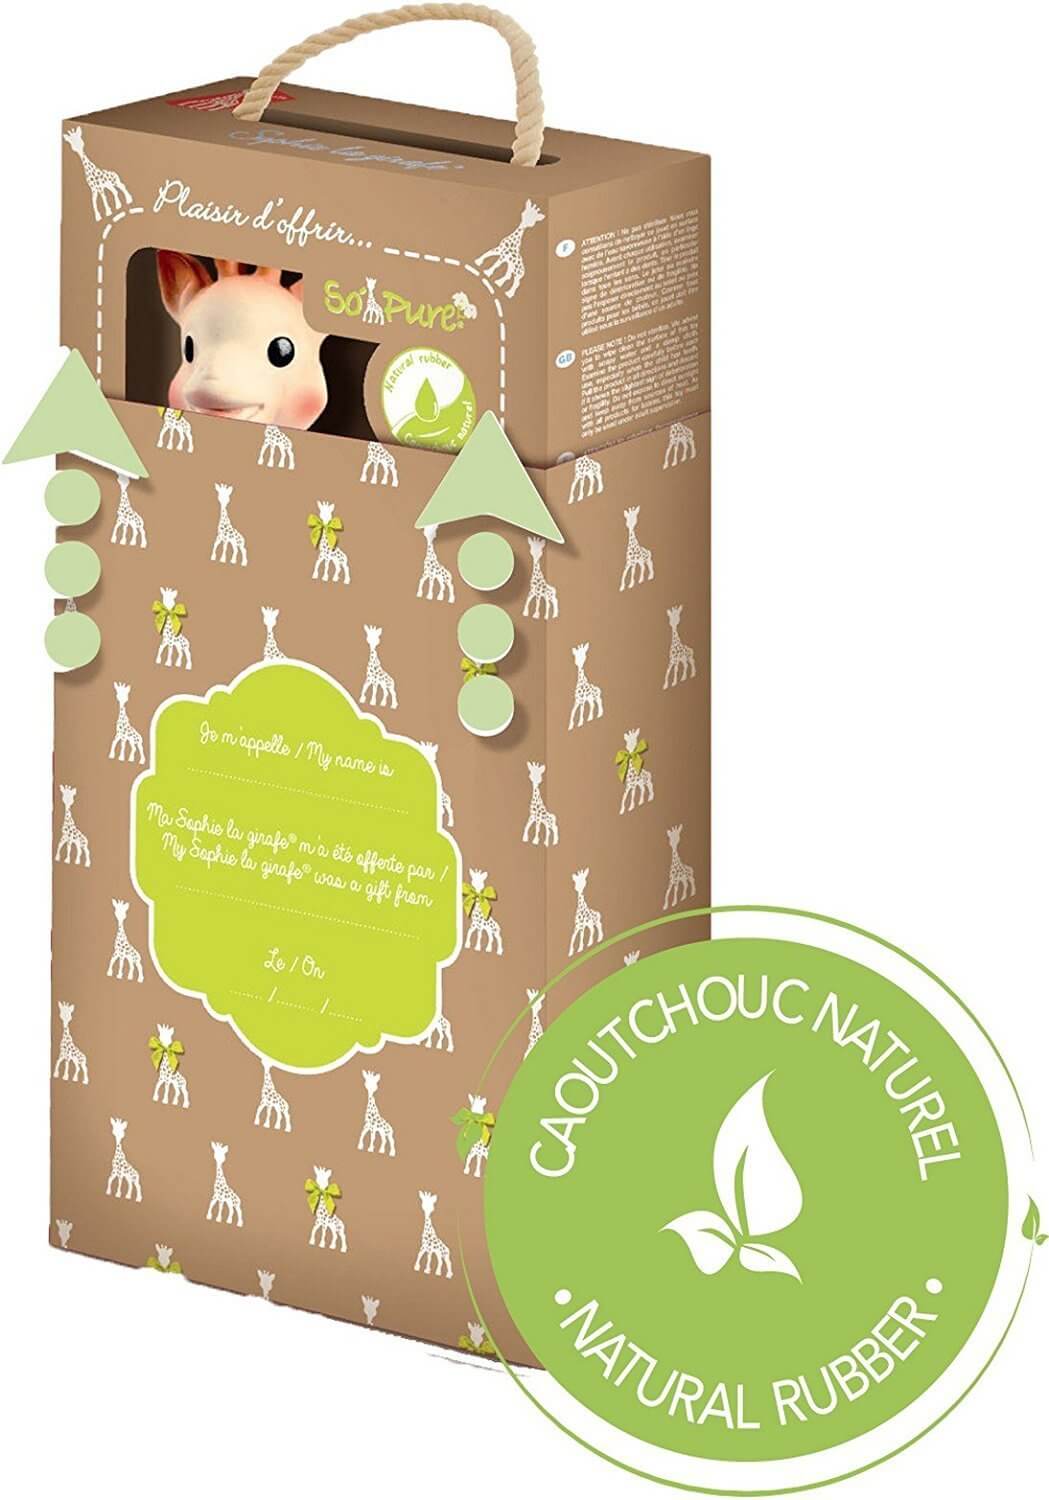 Sophie La Girafe| So Pure Teether | Earthlets.com |  | baby care soothers & dental care